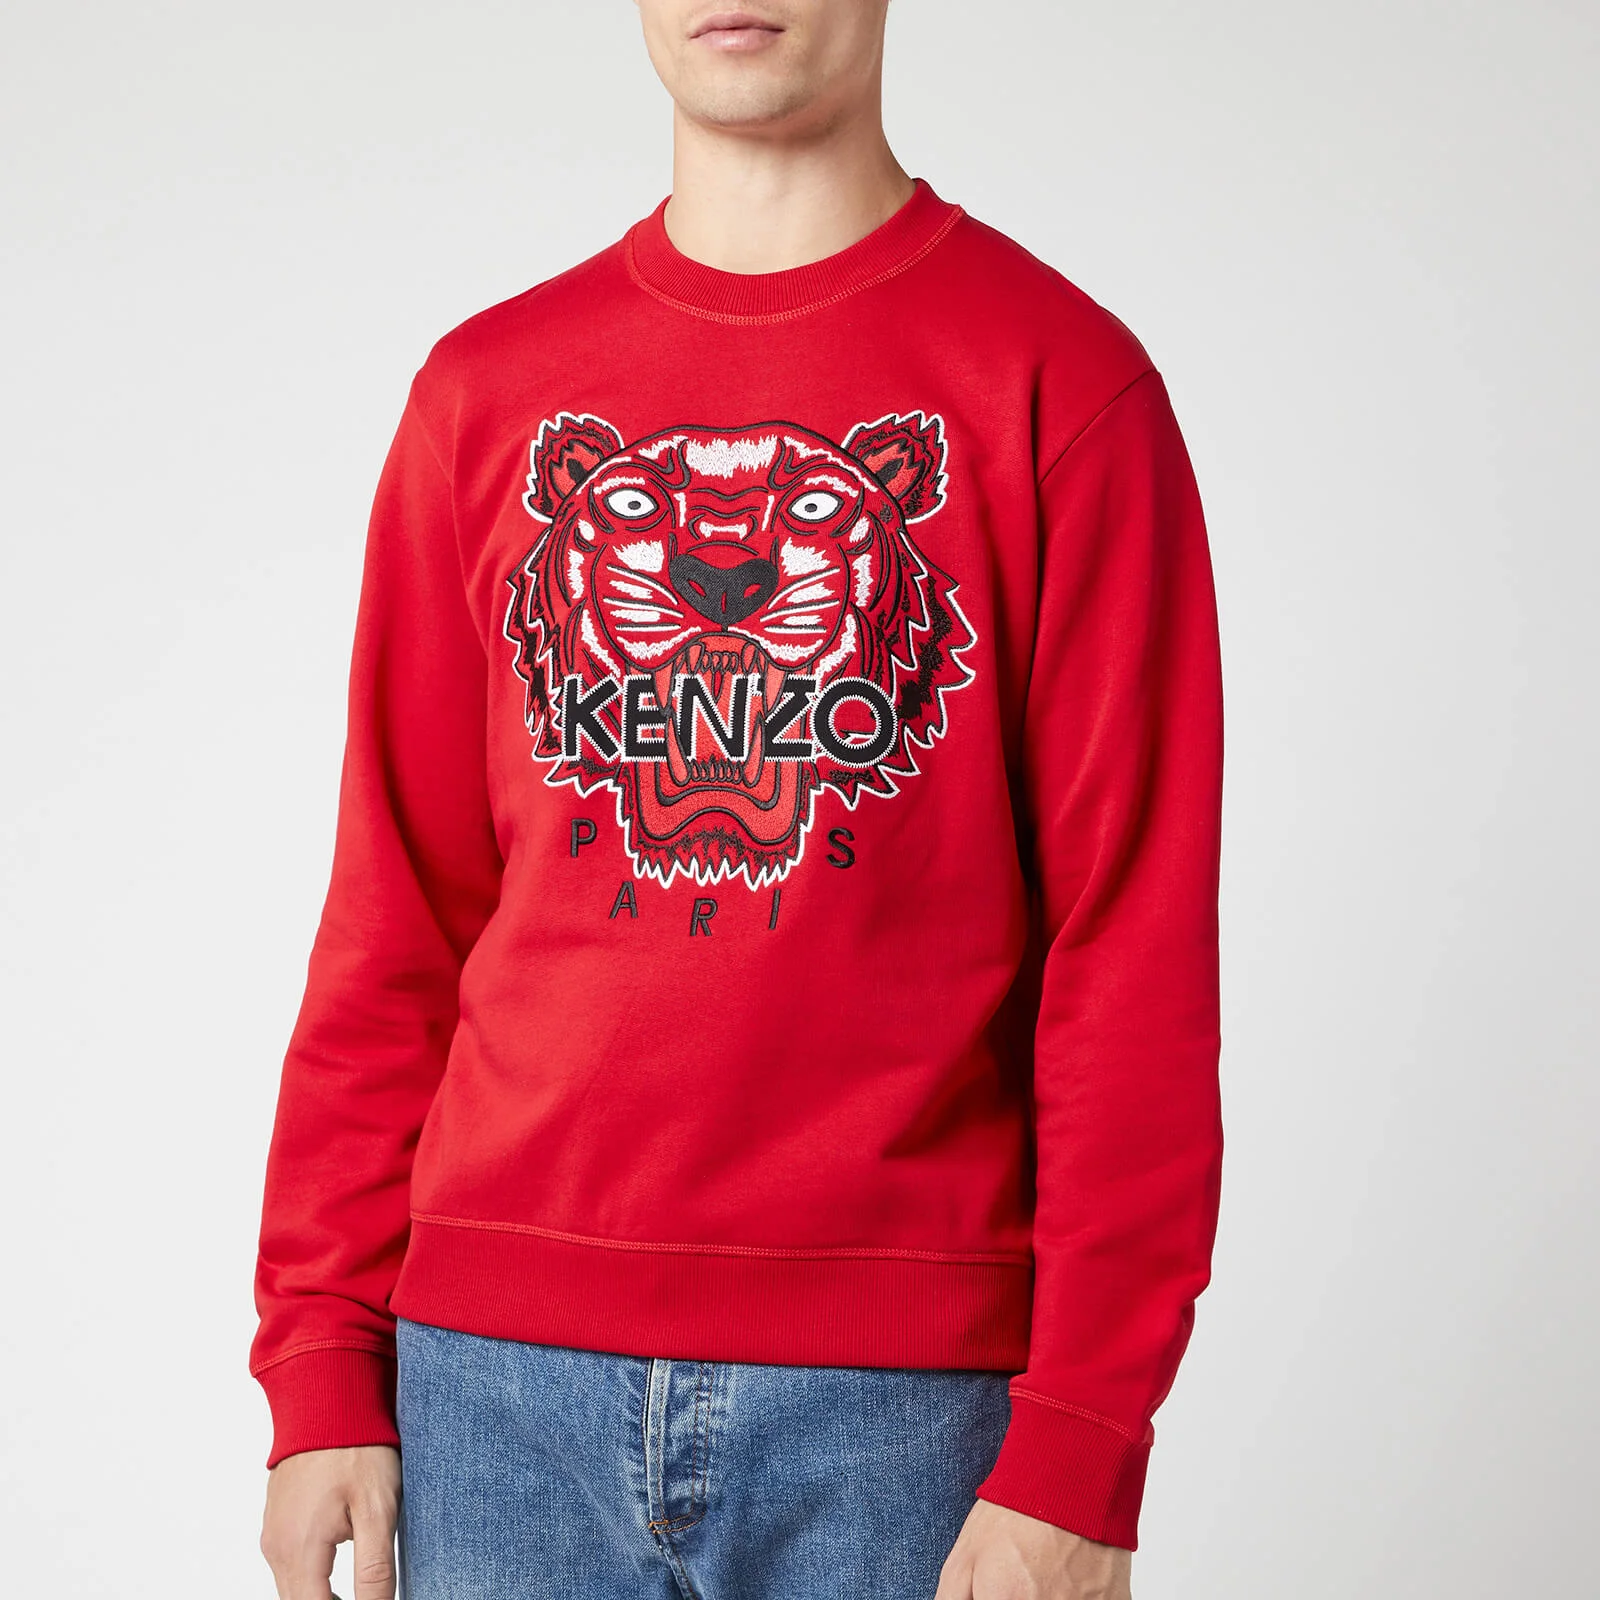 KENZO Men's Classic Tiger Embroidered Sweatshirt - Red Image 1